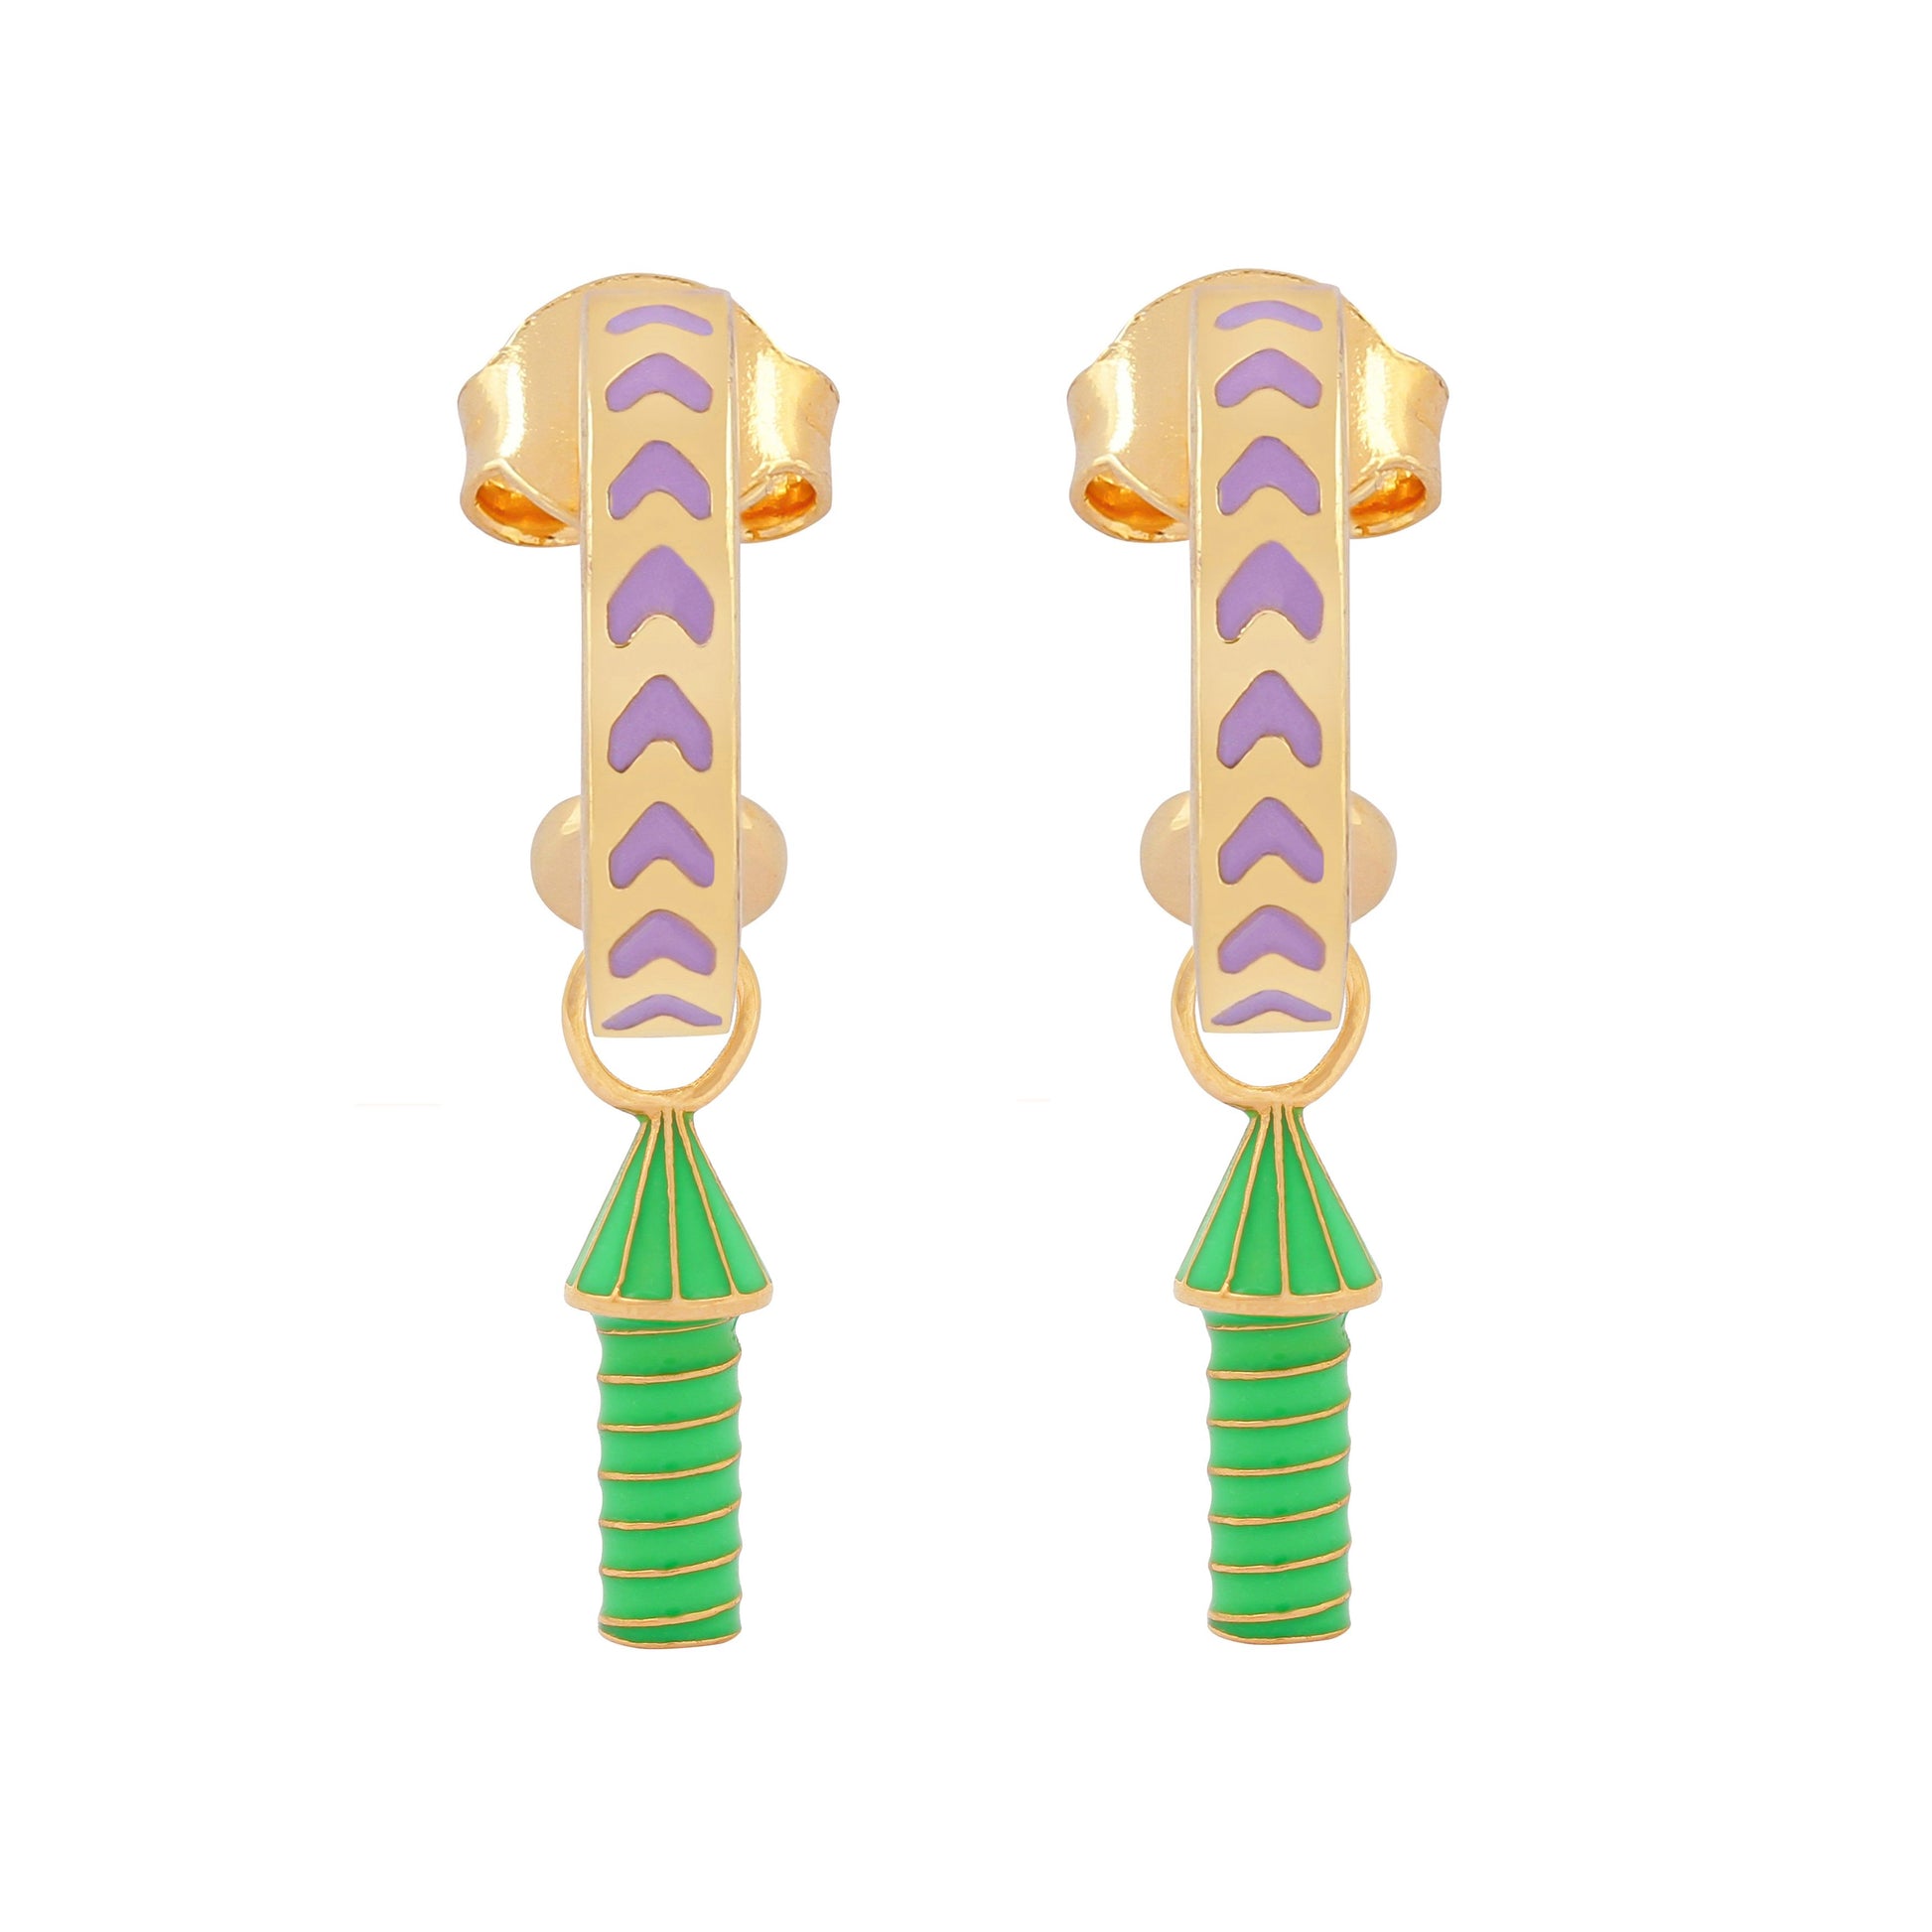 image of rocket enamel earrings in purple, green and gold on white background